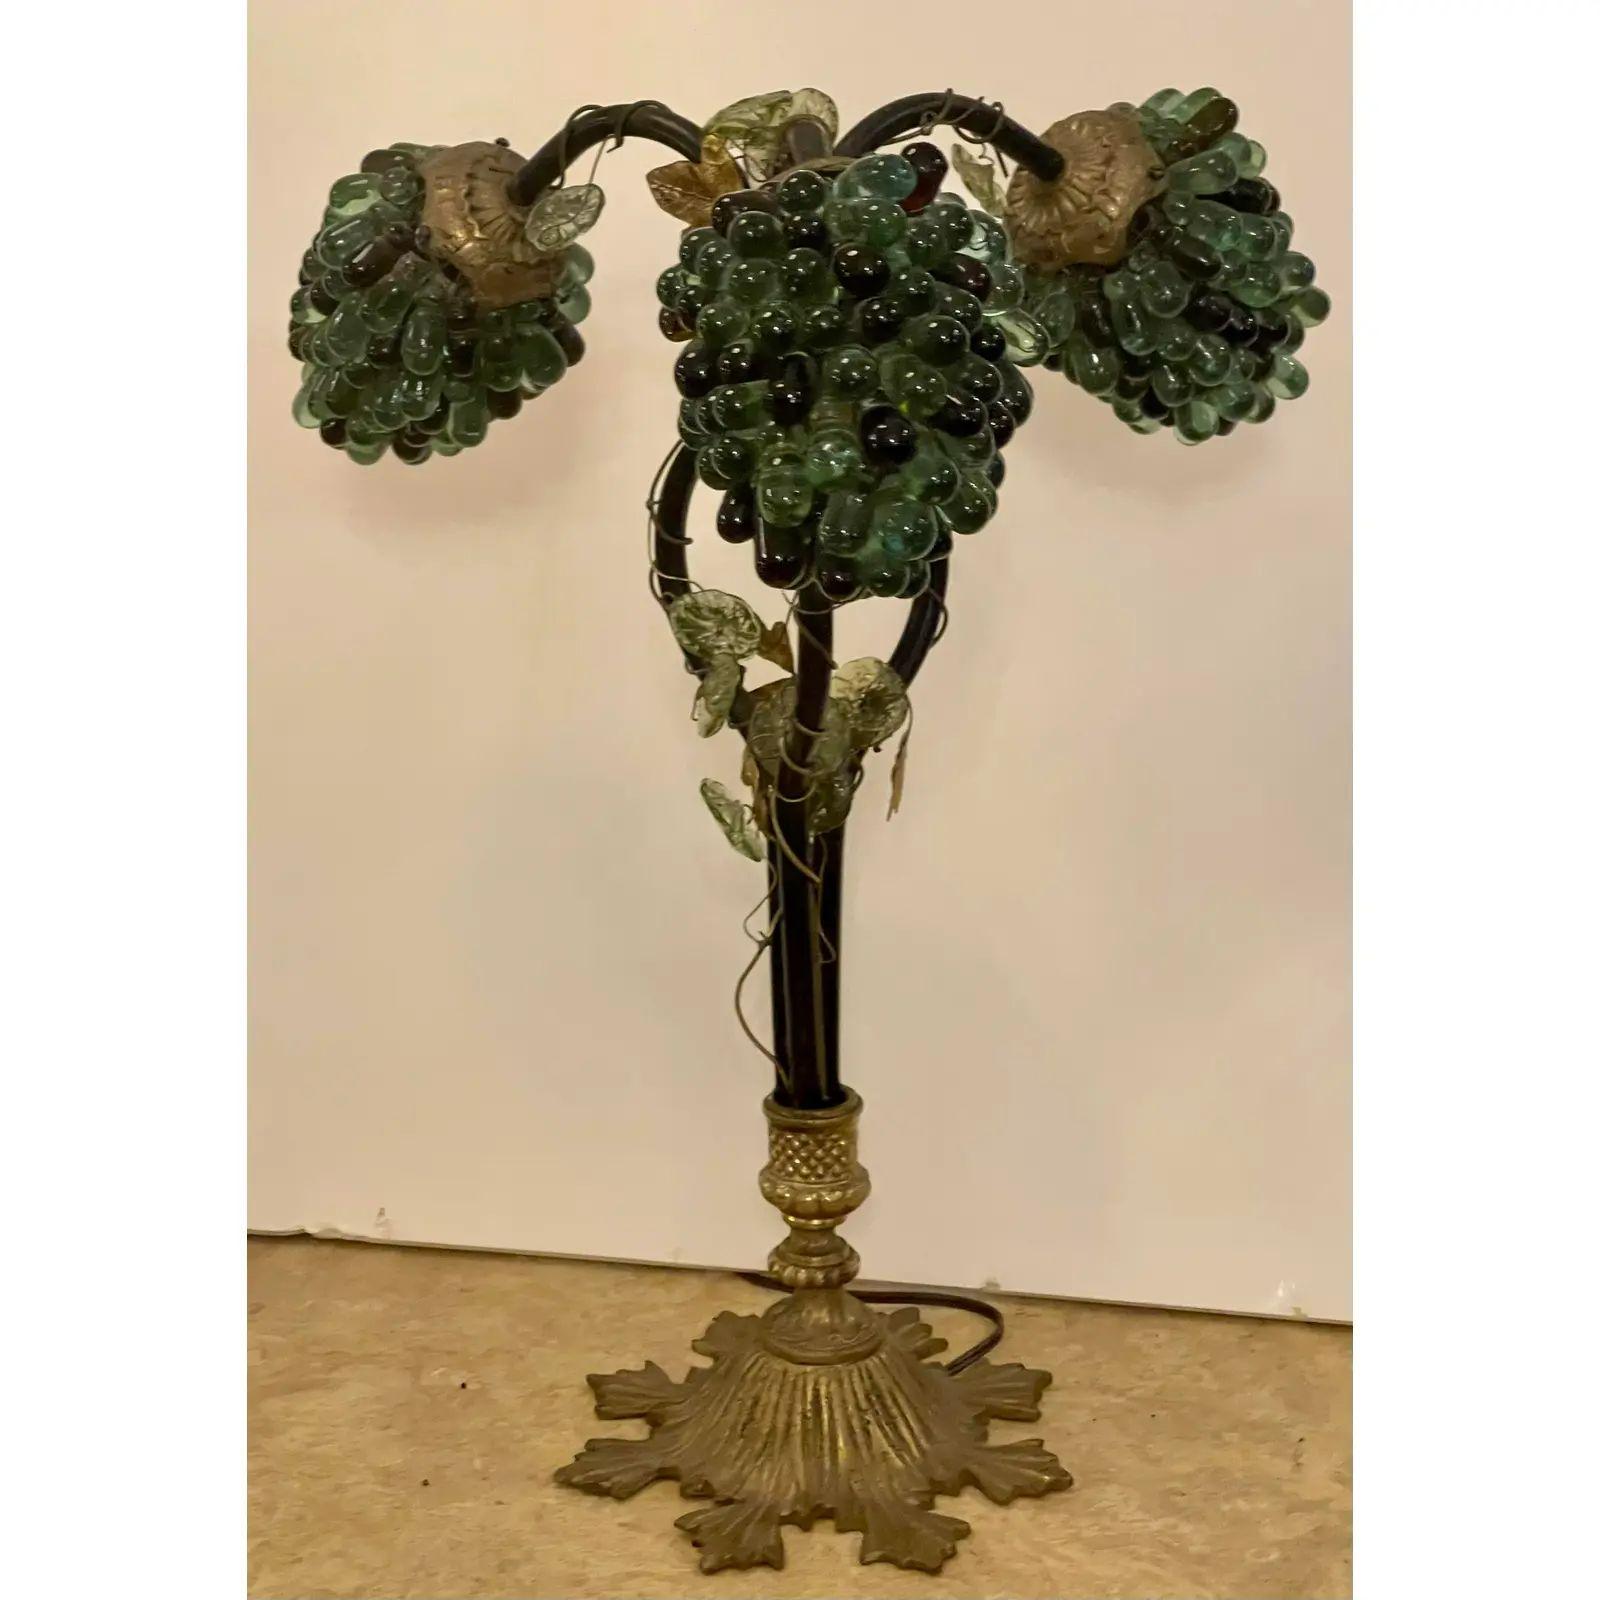 Antique Venetian Glass & Bronze Grape Cluster table lamps - a pair

Additional information: 
Materials: Bronze Venetian, Glass
Color: Green
Period: 1920s
Styles: Italian
Lamp Shade: Included
Power Sources: Up to 120V (US Standard), Corded,